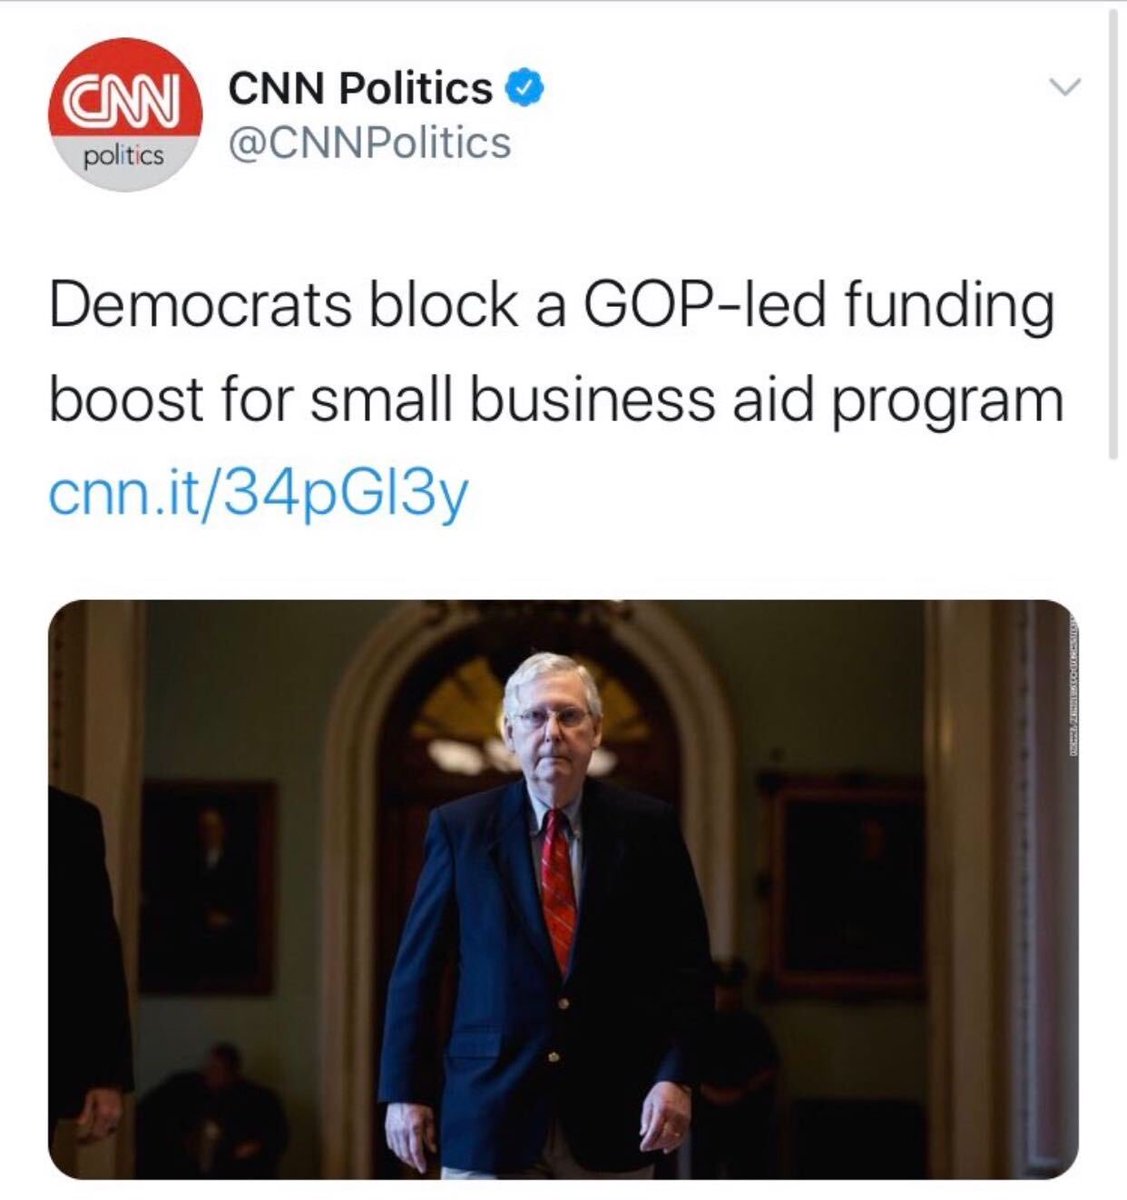  @CNN changed their headline to protect the Democrats.They don’t want you to know that Democrats are using workers losing their paychecks as leverage.